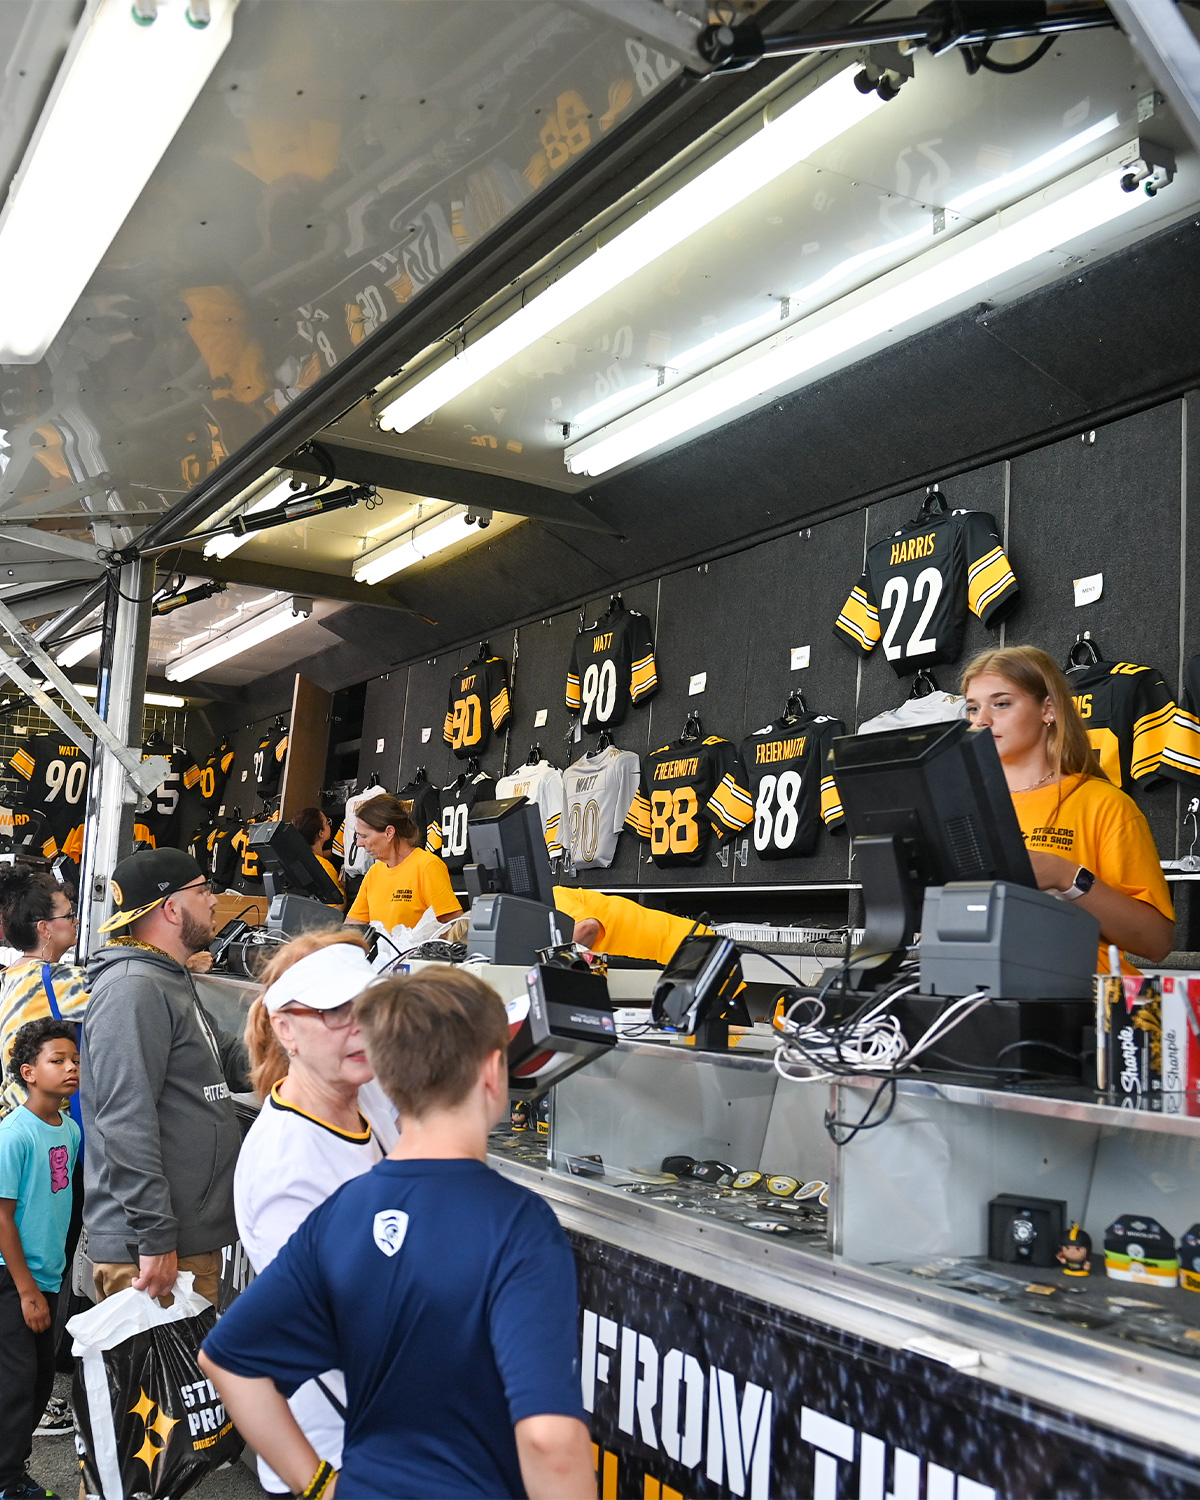 Steelers Pro Shop on X: 'When you get to Saint Vincent College today for  Back Together Saturday, don't forget to check out the Steelers Pro Shop  Tent at the #Steelers Experience! #SteelersCamp